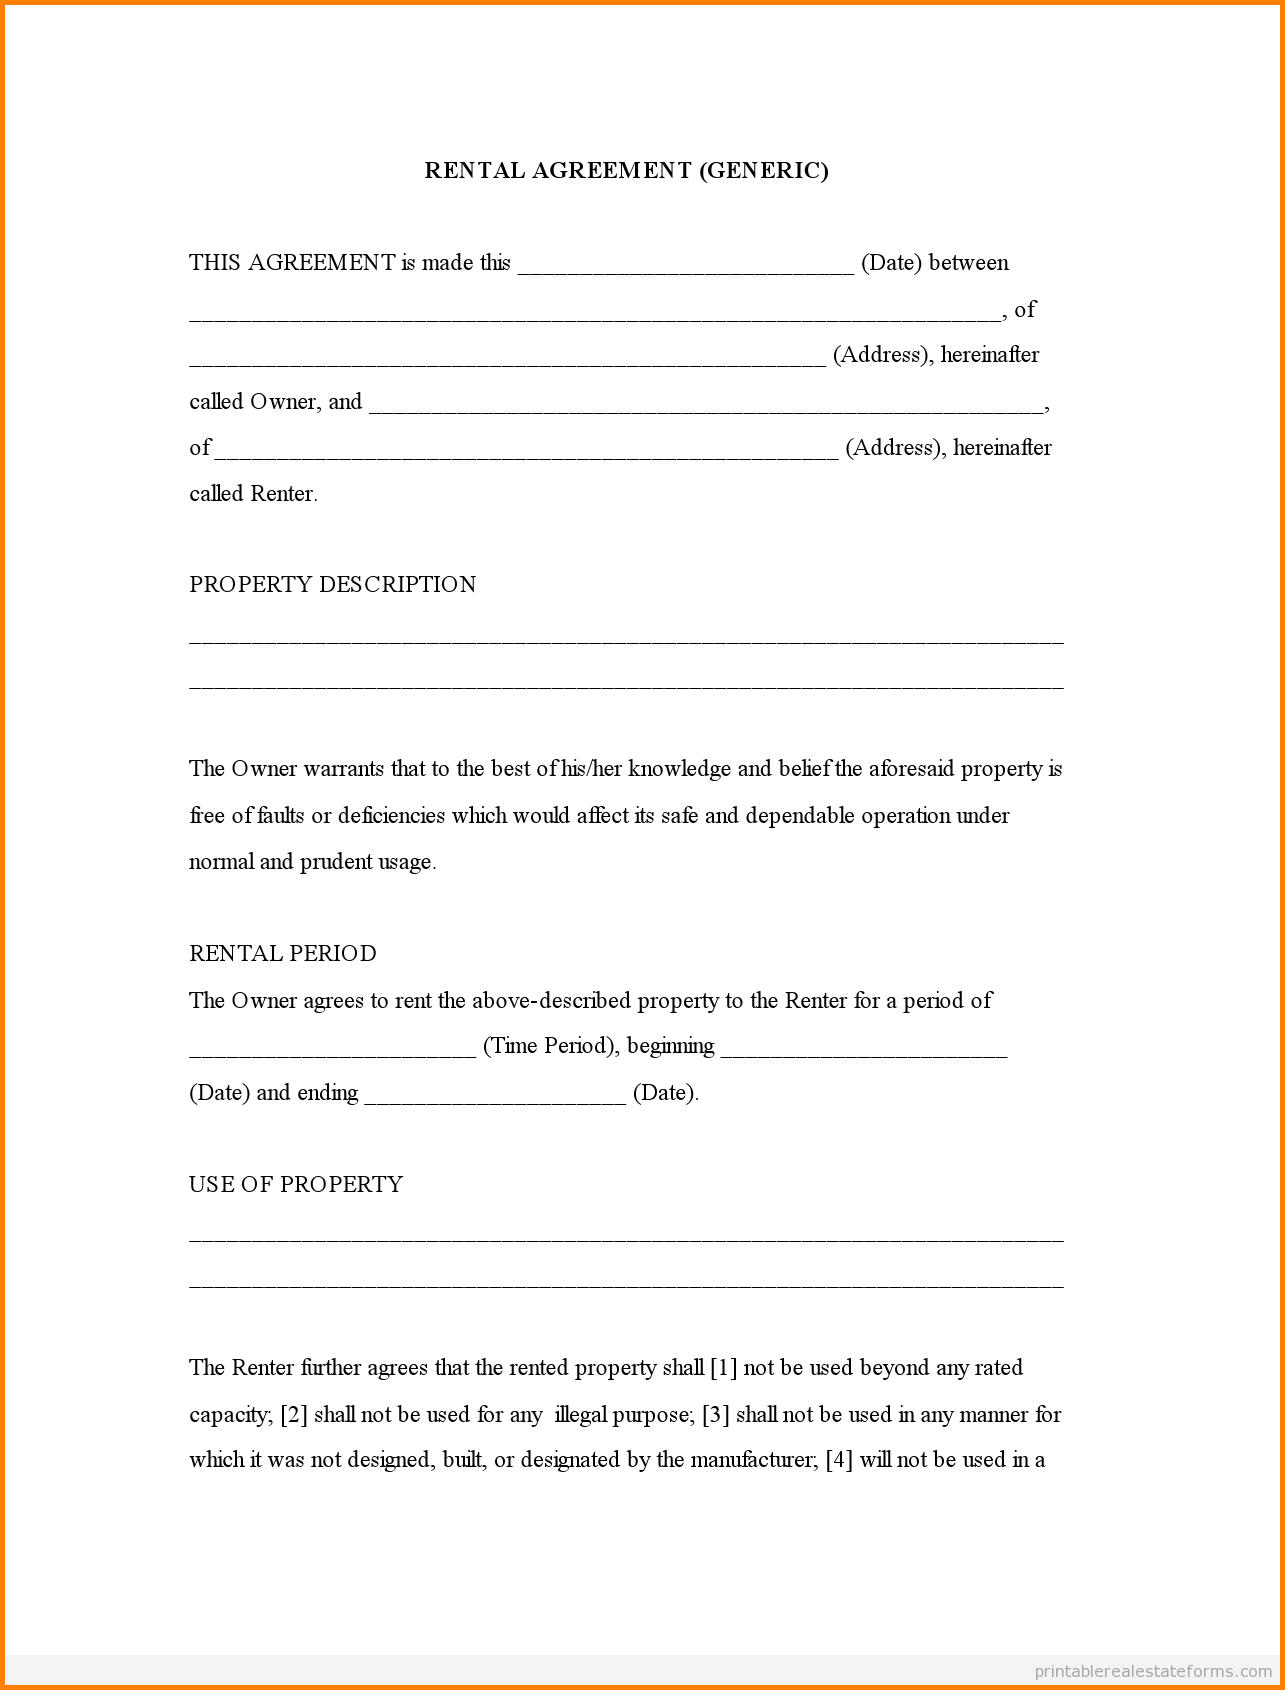 29 Images Of Print Free Rental Agreement Template | Linaca - Blank Lease Agreement Free Printable